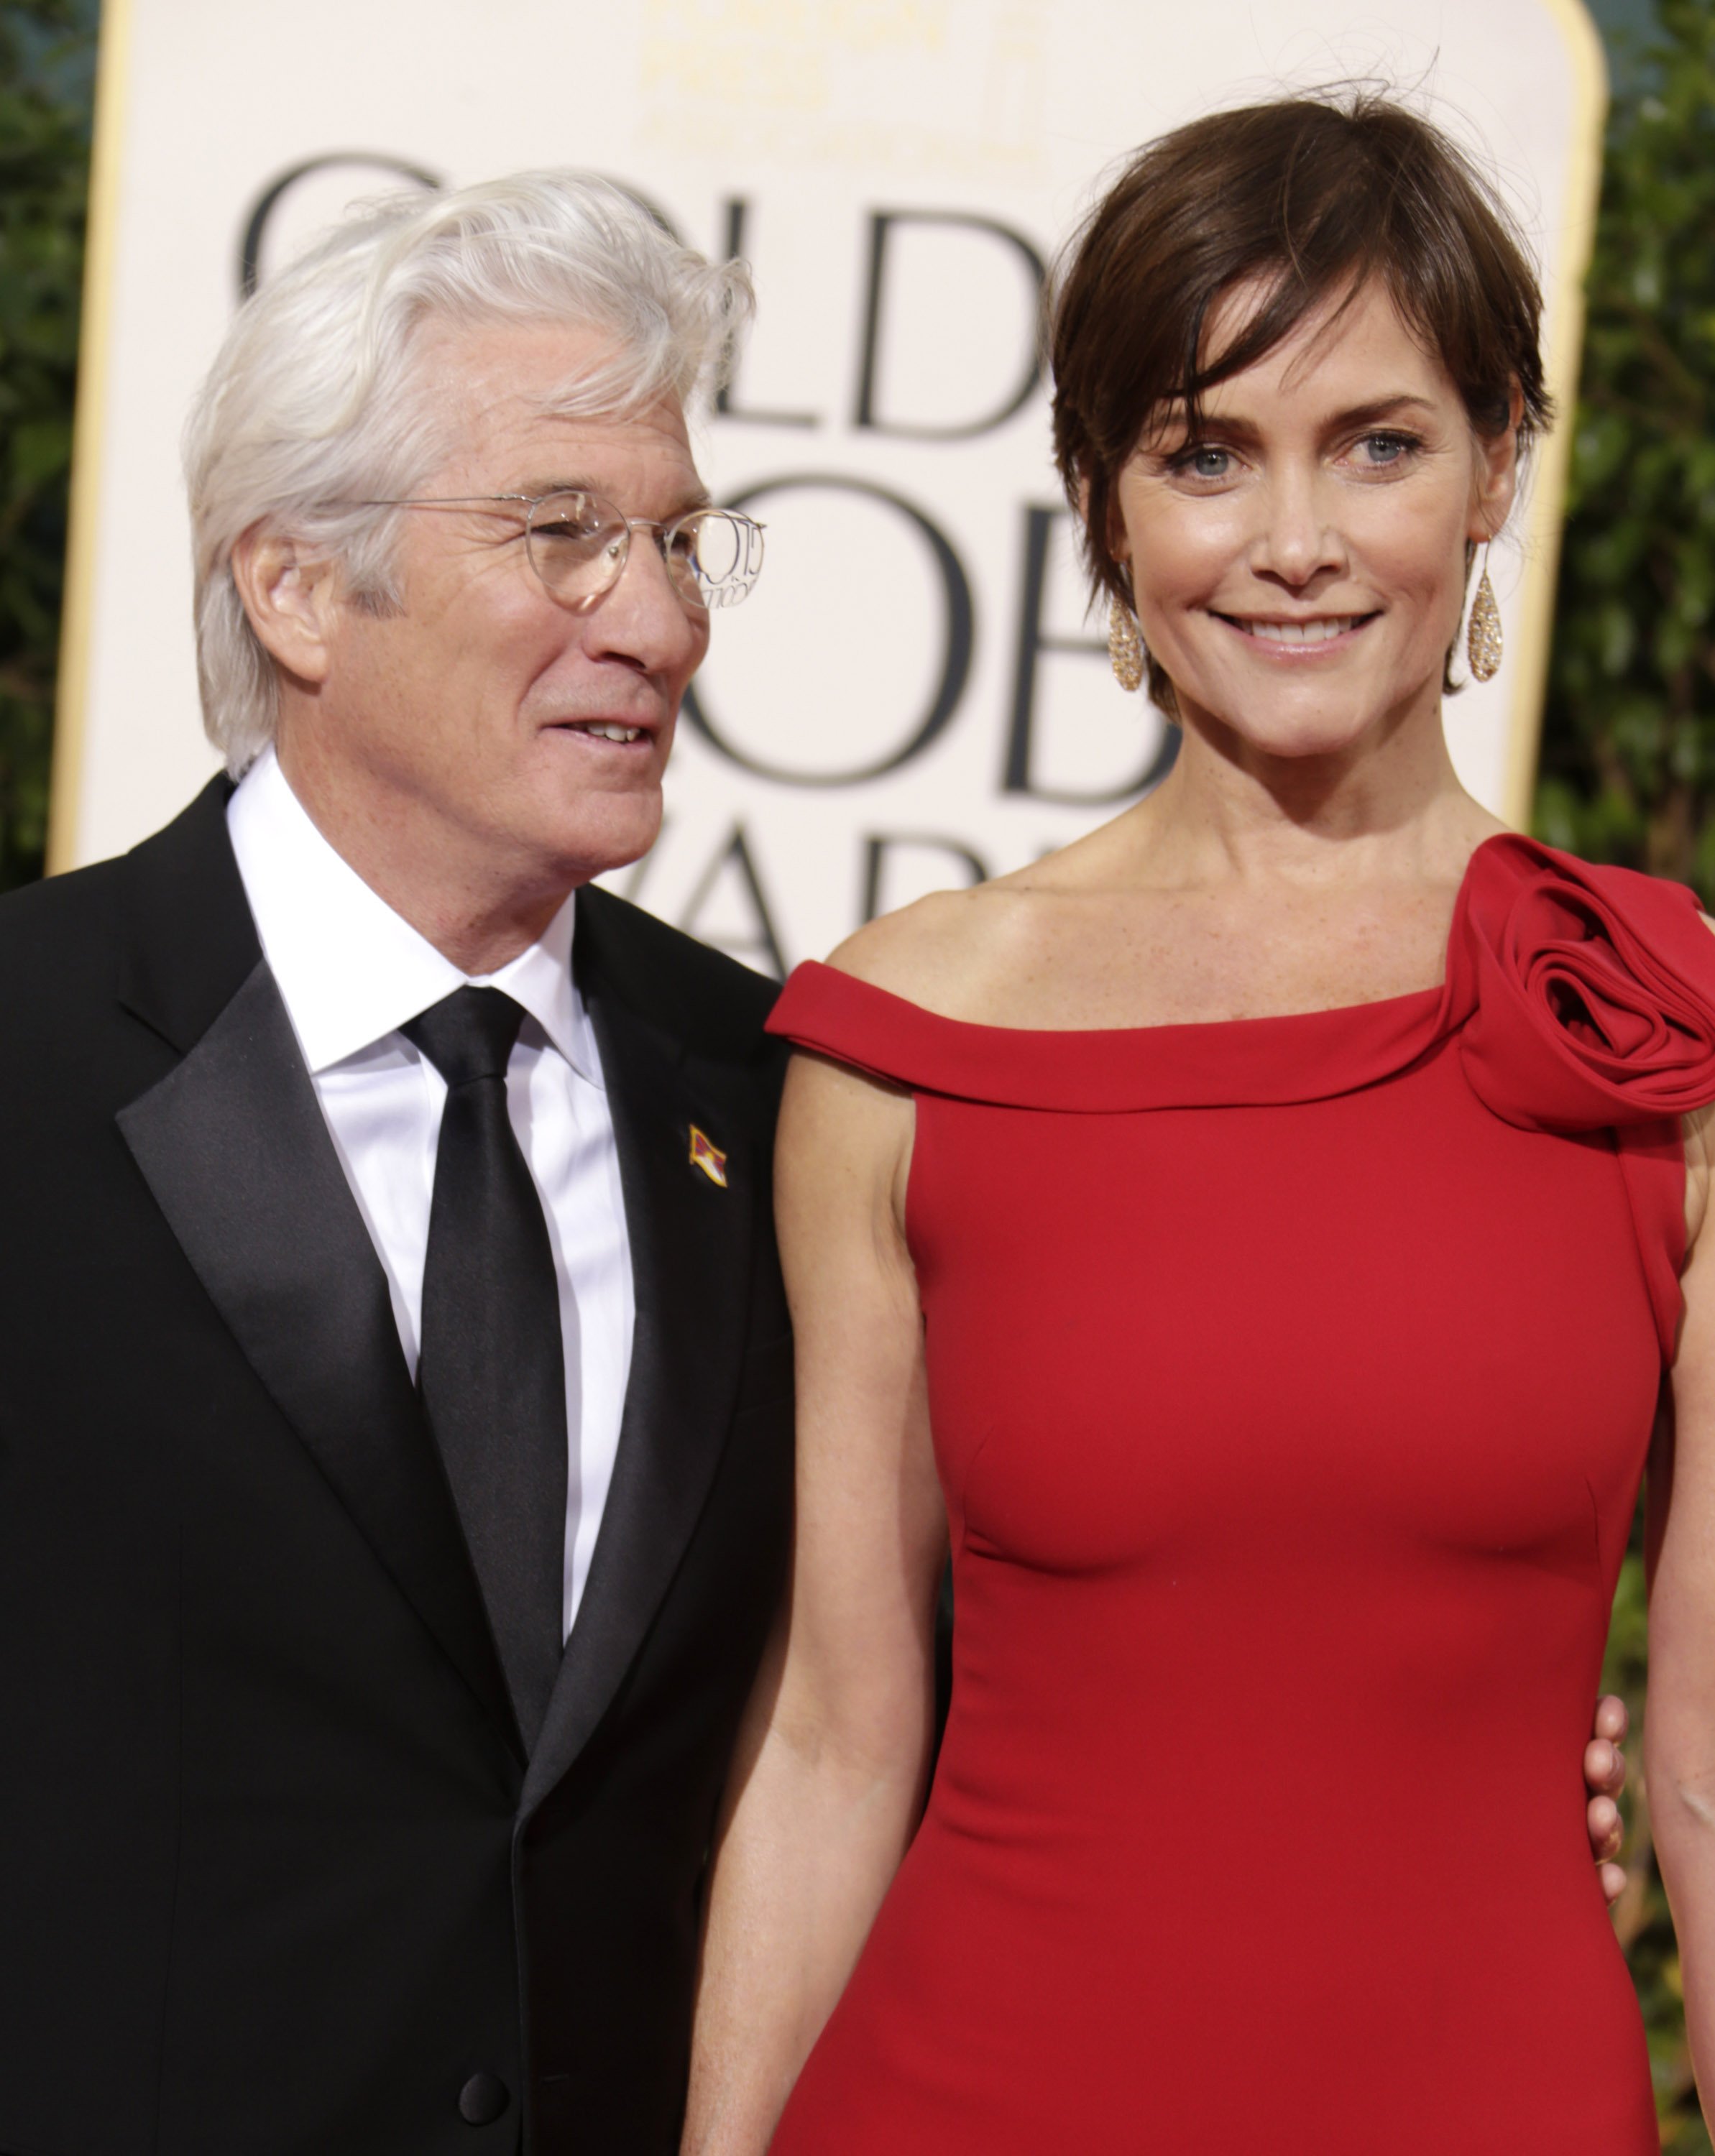 Richard Gere and Carey Lowell at the 70th Annual Golden Globe Awards took place at The Beverly Hilton Hotel on January 13, 2013 in Beverly Hills, California | Source: Getty Images 